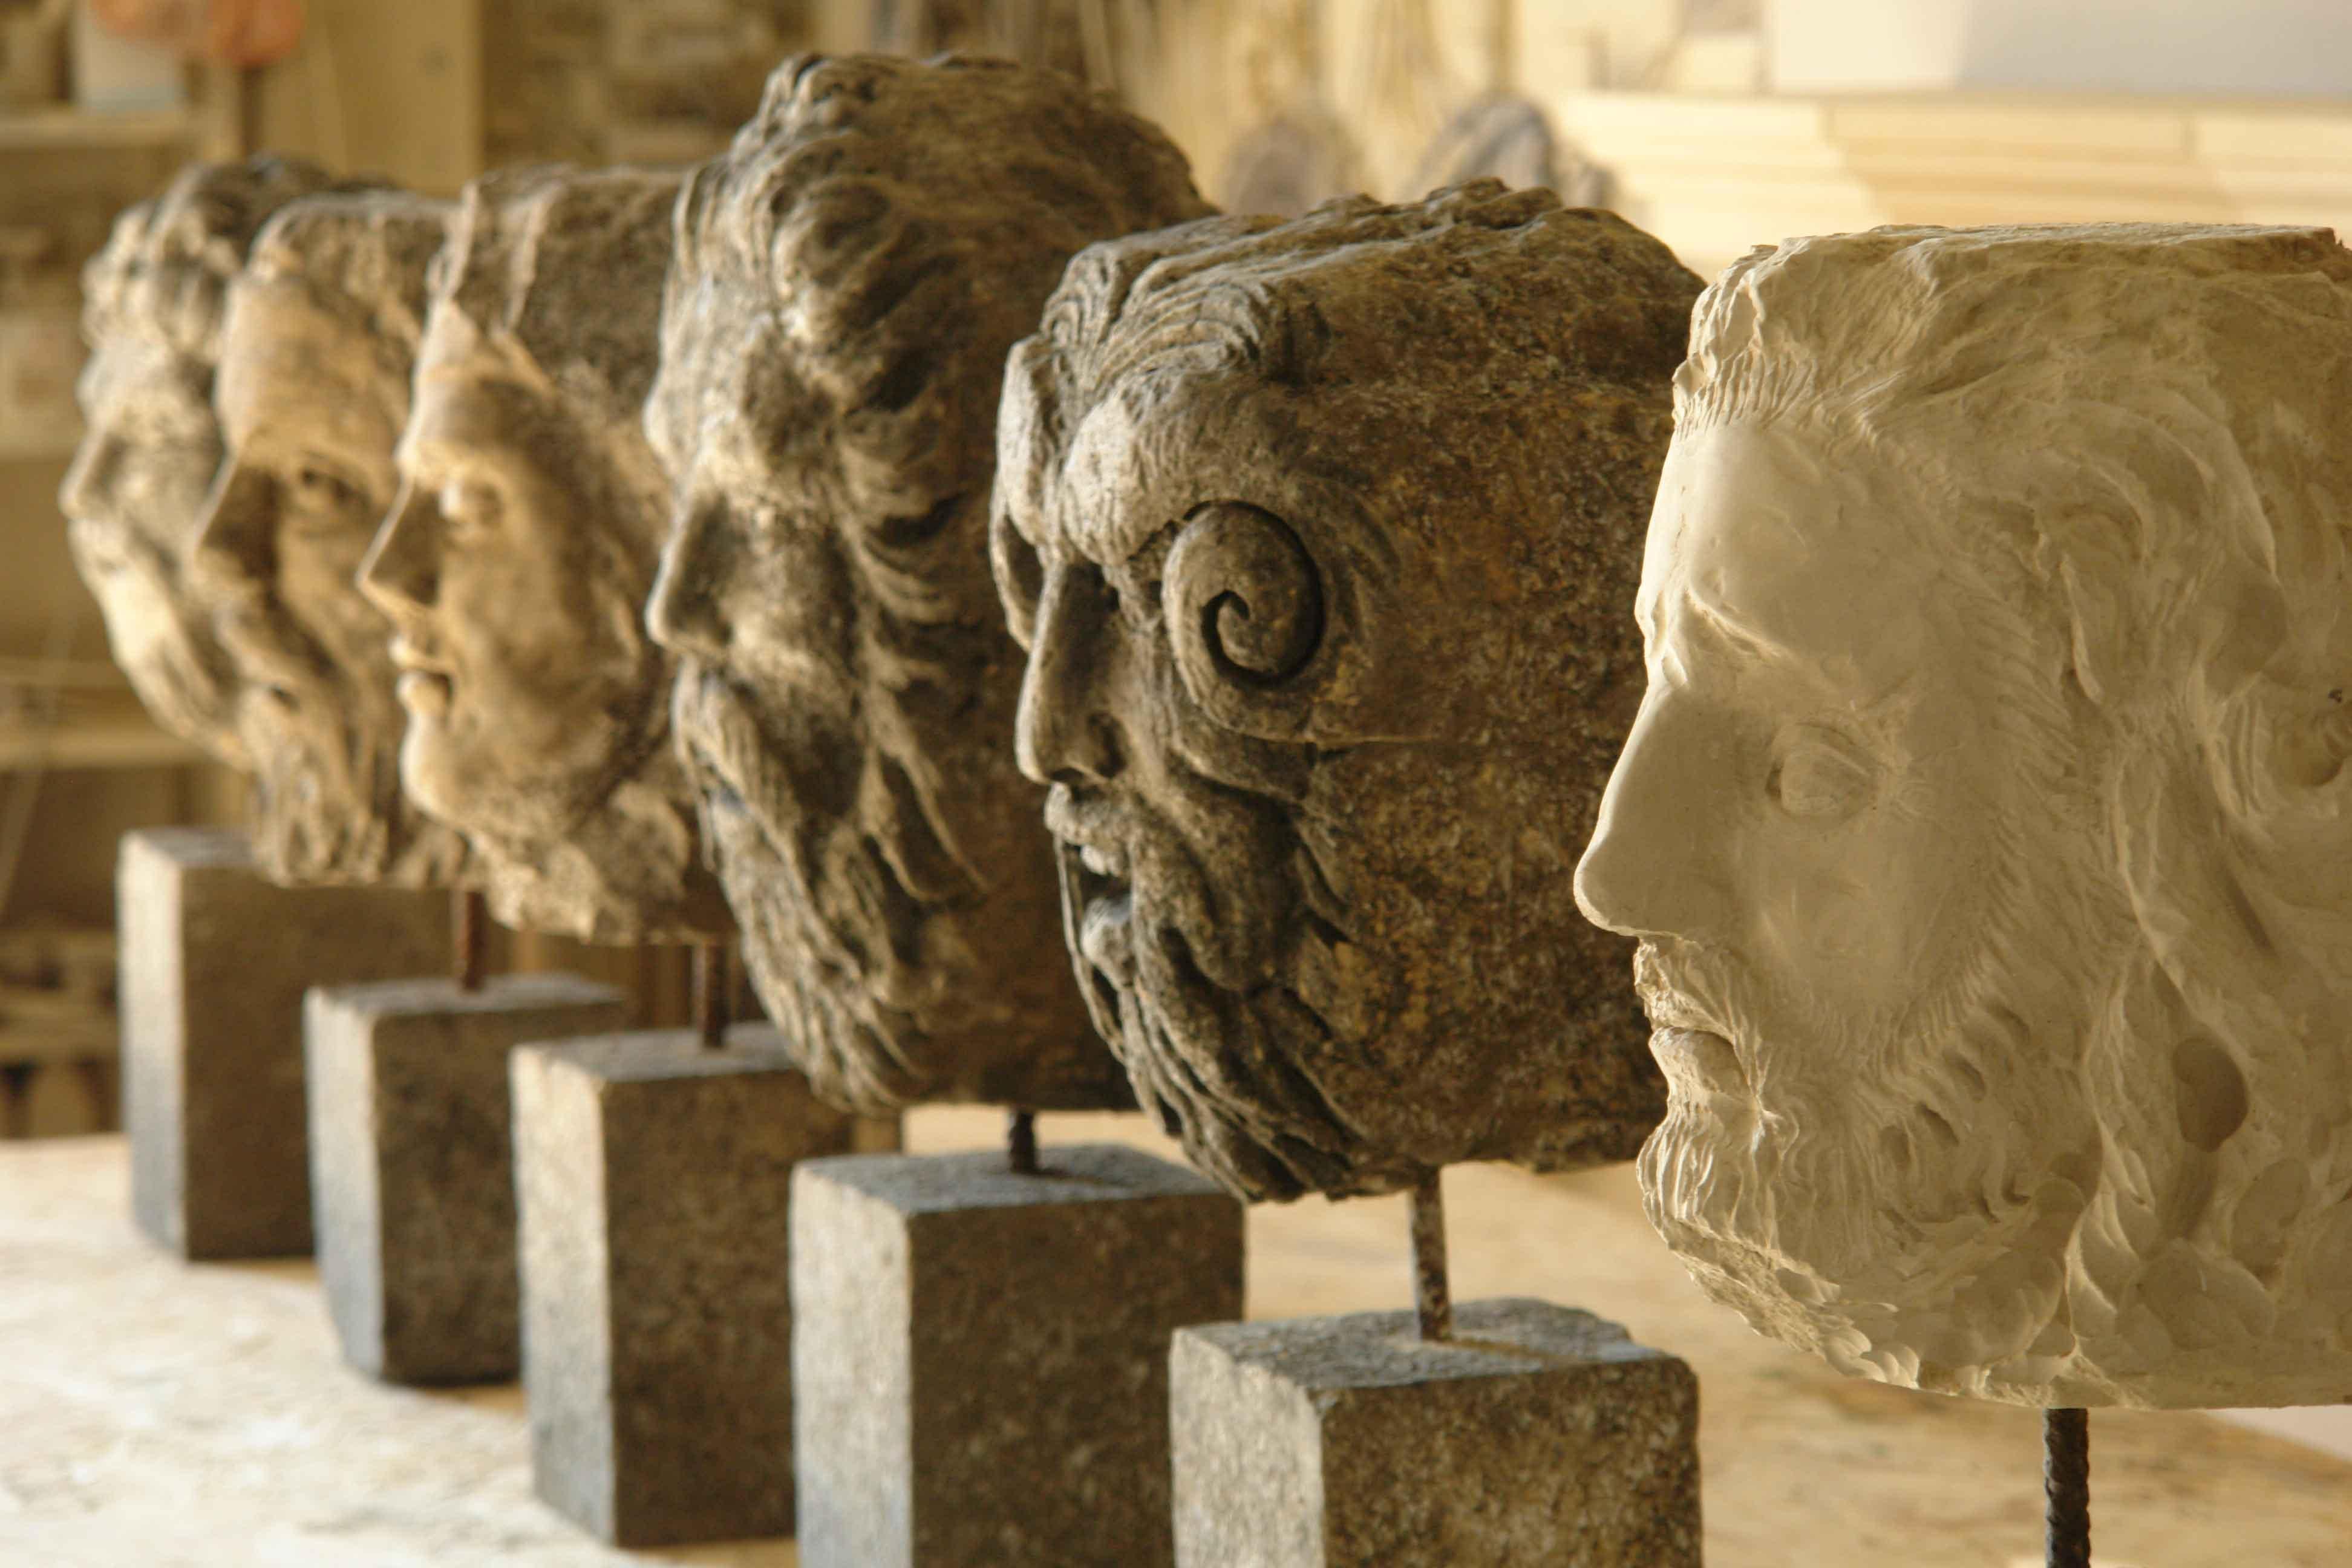 Exceptional collection of 6 Gods head statues hand-carved in limestone late 20th century from Italy. Art work. Rare and unique.
Each of them stands in a pedestal in a block limestone.
Excellent quality of art work.
More info on demand.
